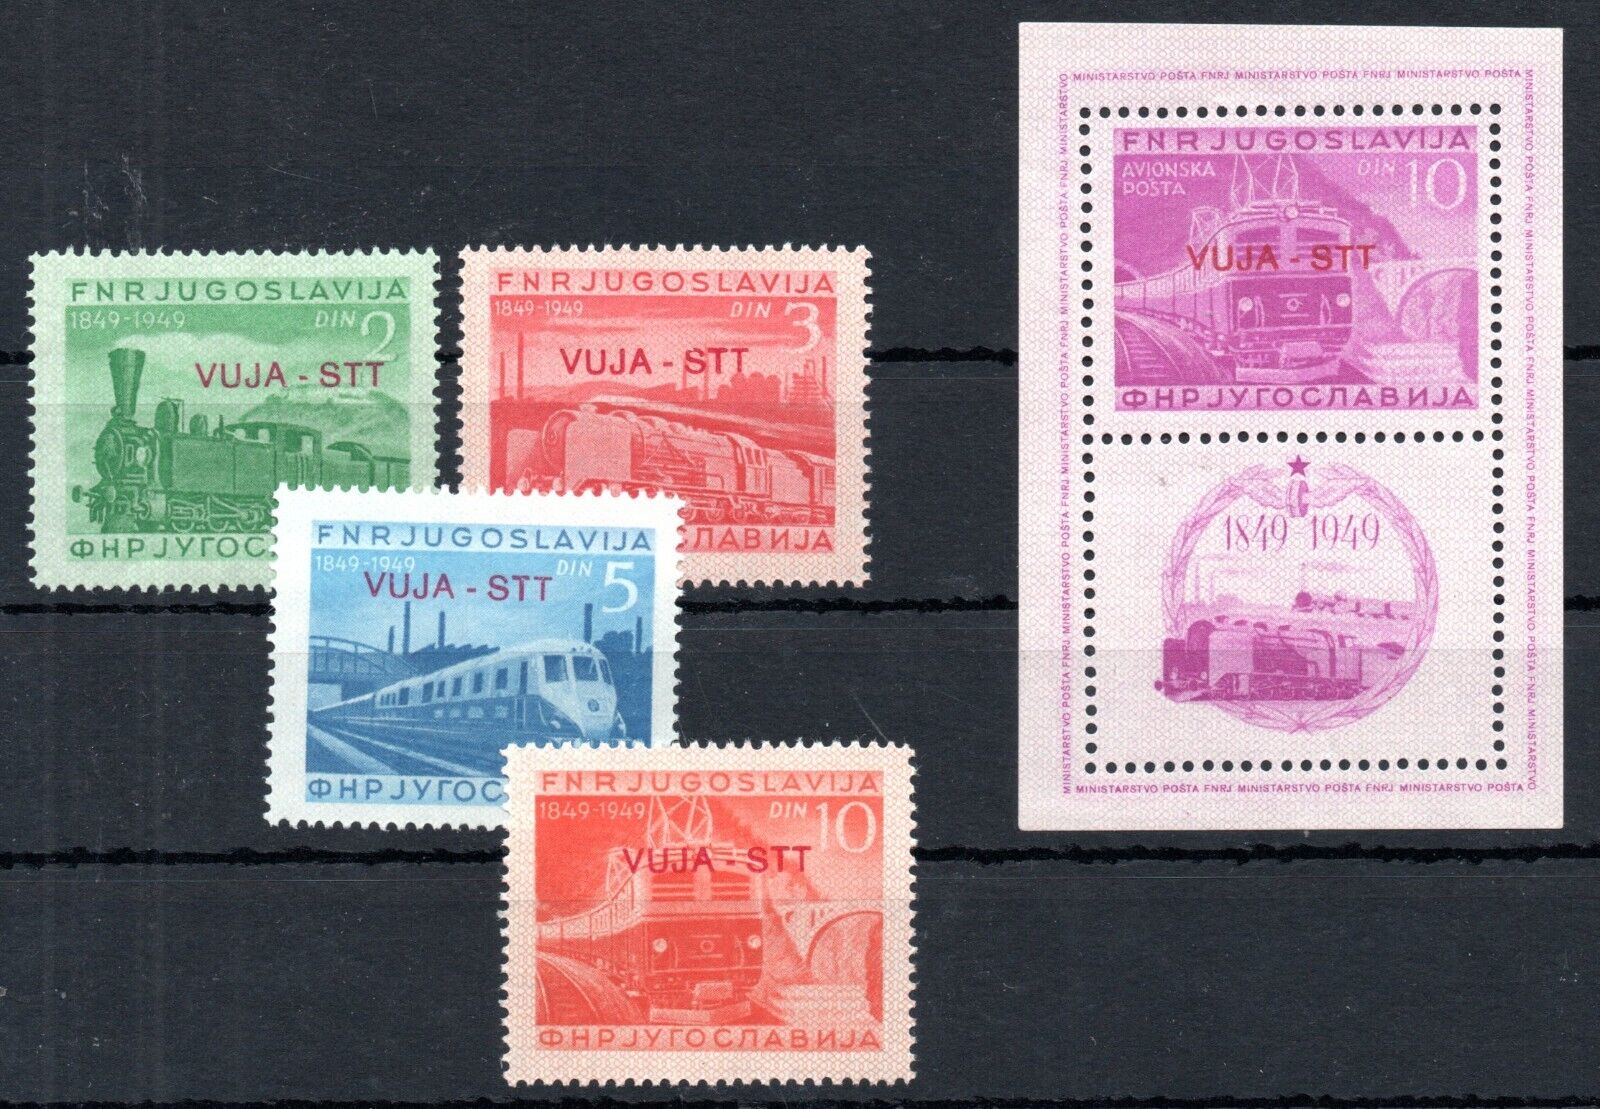 ITALY  TRIESTE  1950  RAILWAY  scarce SS and set  MNH 